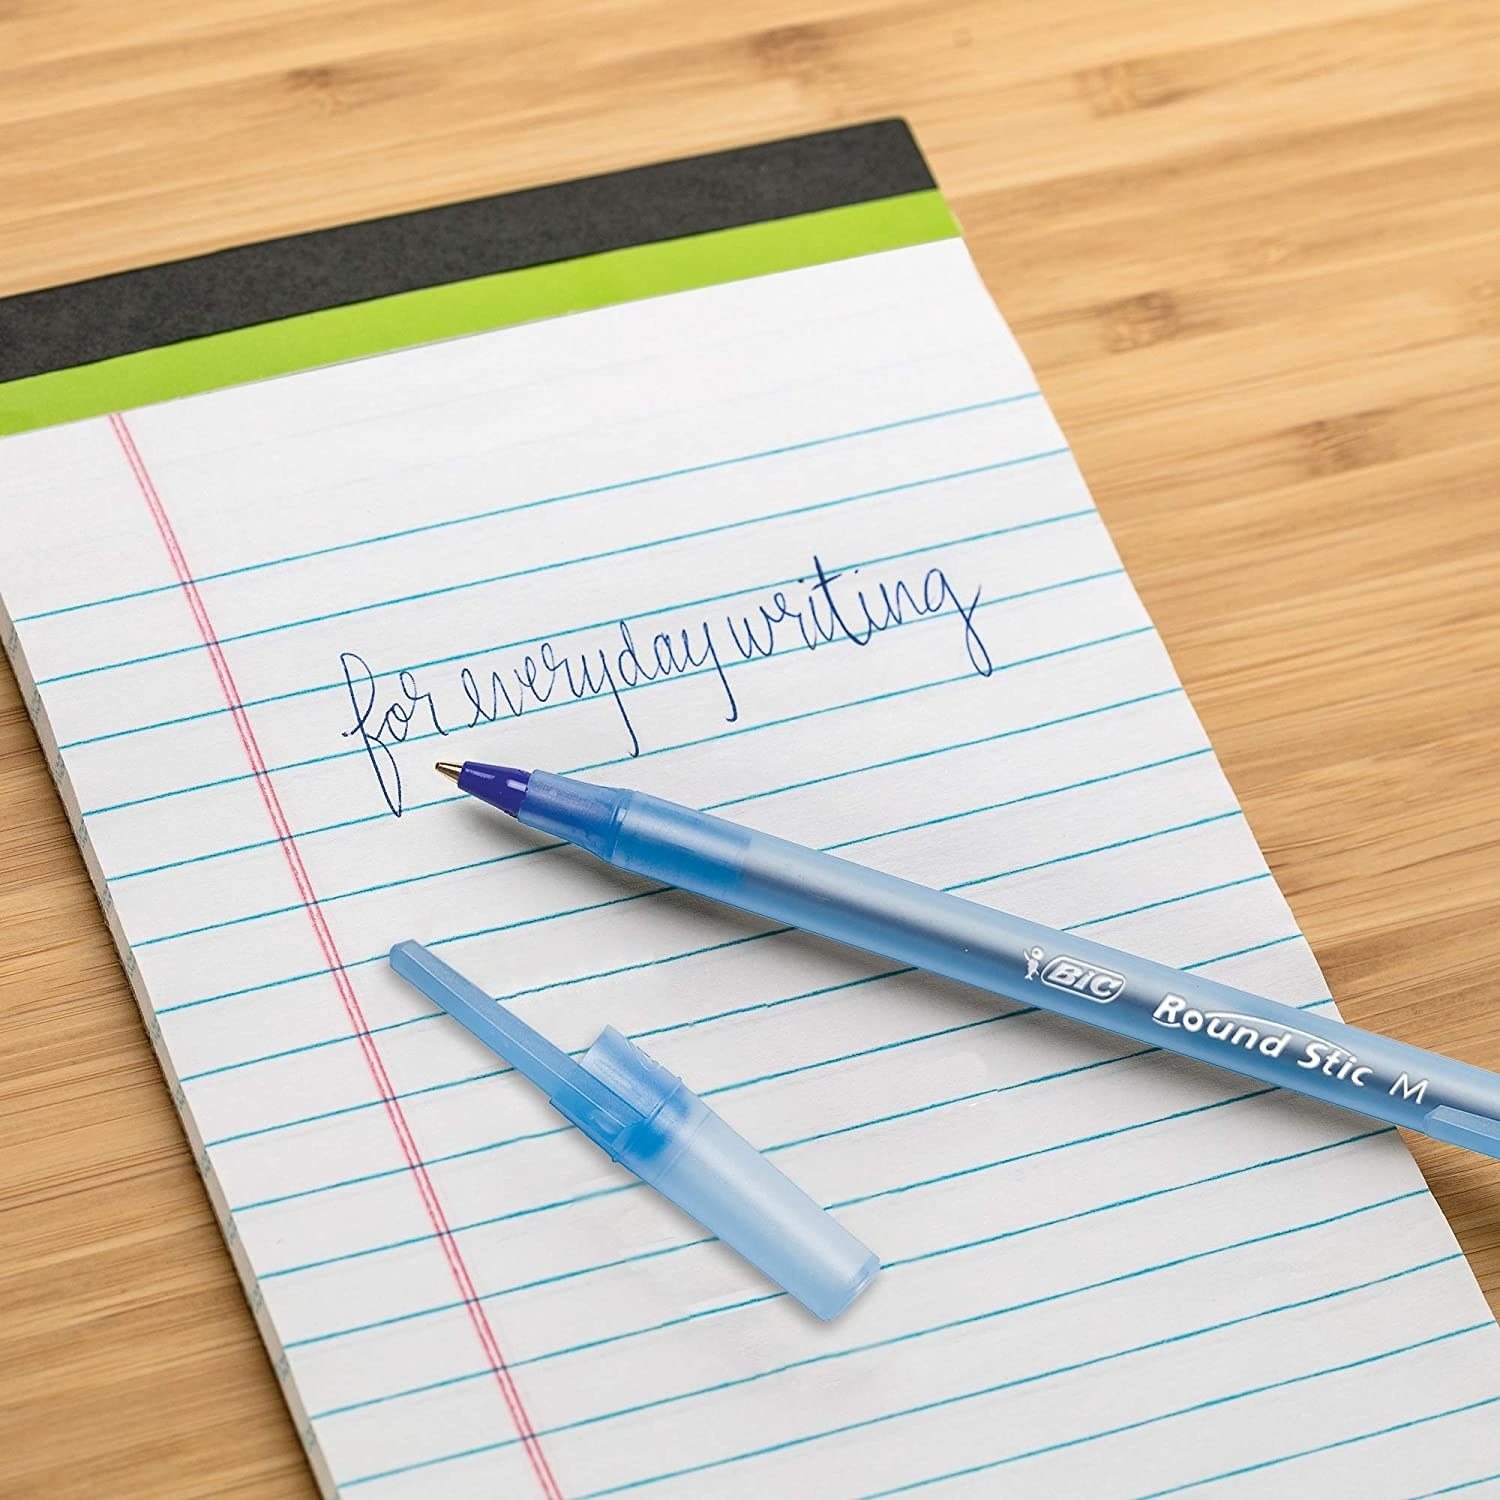 A notepad with an uncapped pen on top